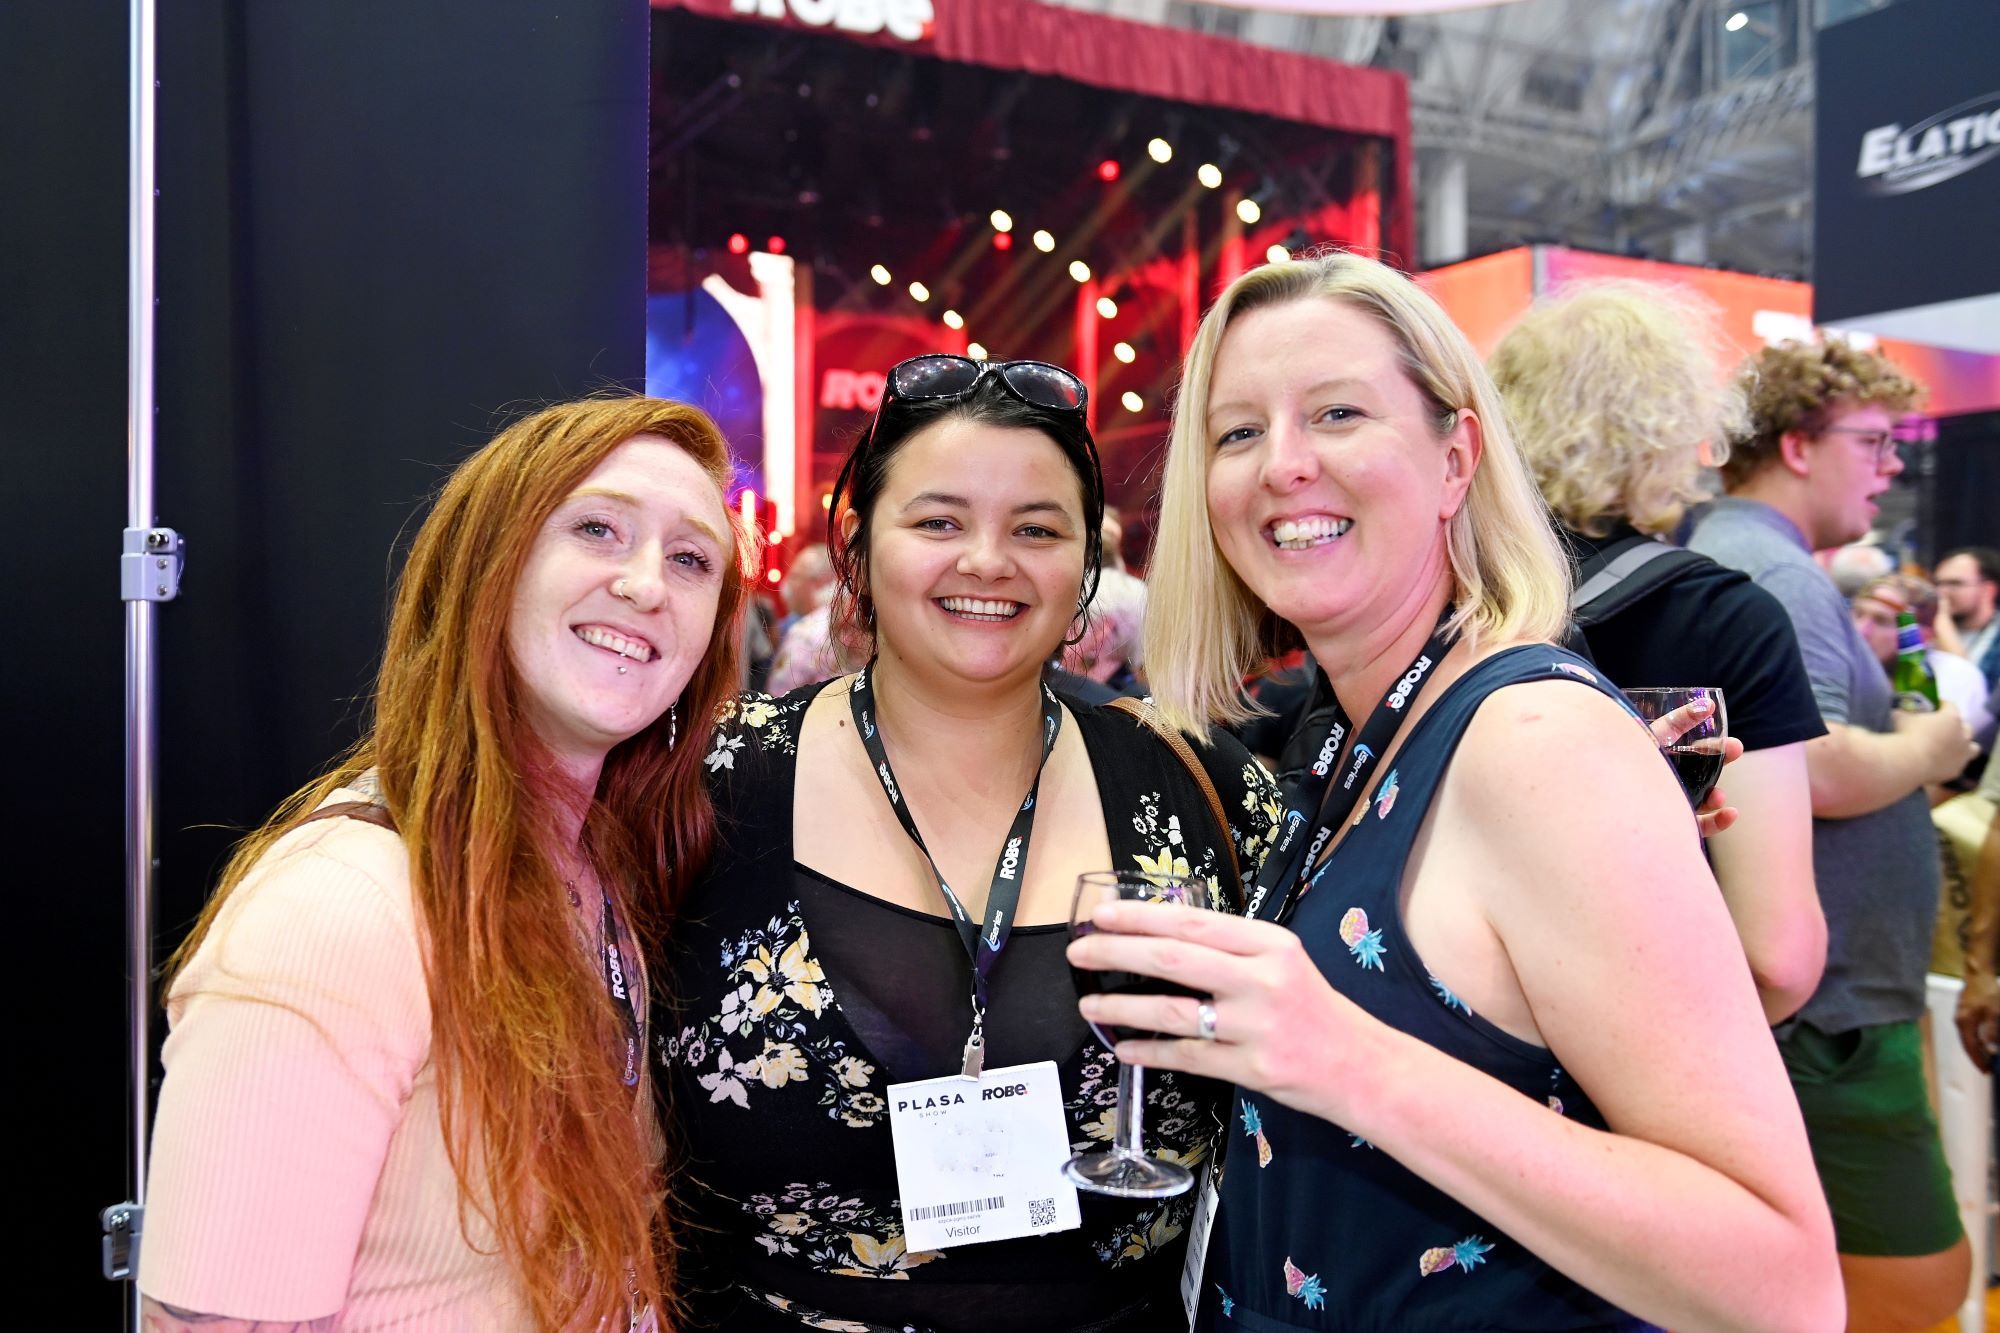 3 women posing for a photo at plasa show after party